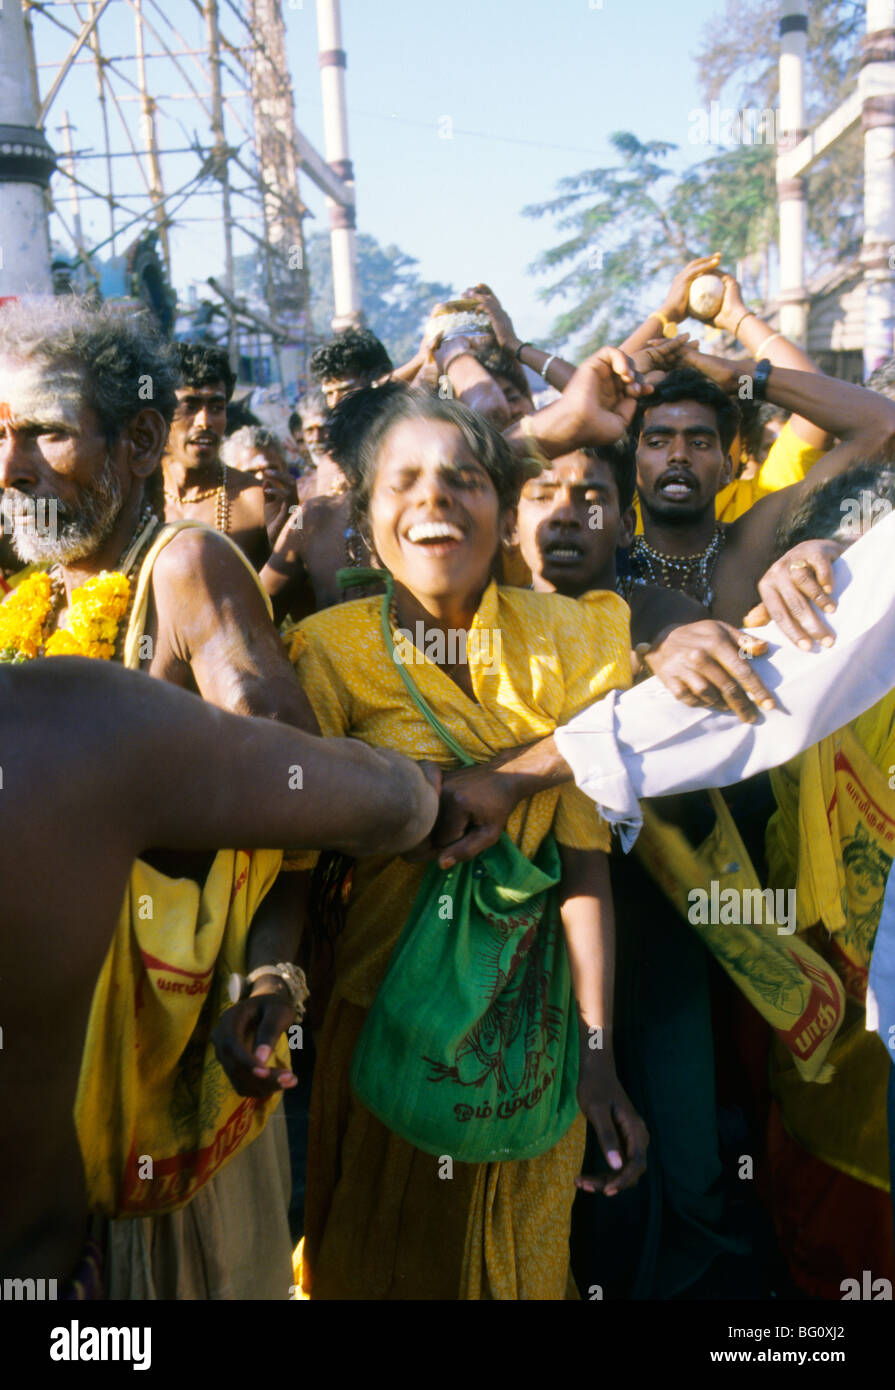 A group of yellow robed devotees and pilgrims have come from a distant village and are dancing and singing their way through the streets of Palani in the south India state of Tamil Nadu during the annual Hindu Thaipusam festival. They are celebrating the youngest son of Shiva, Lord Murugan's birthday and will ultimately ascend the steps to his temple in Palani. Stock Photo